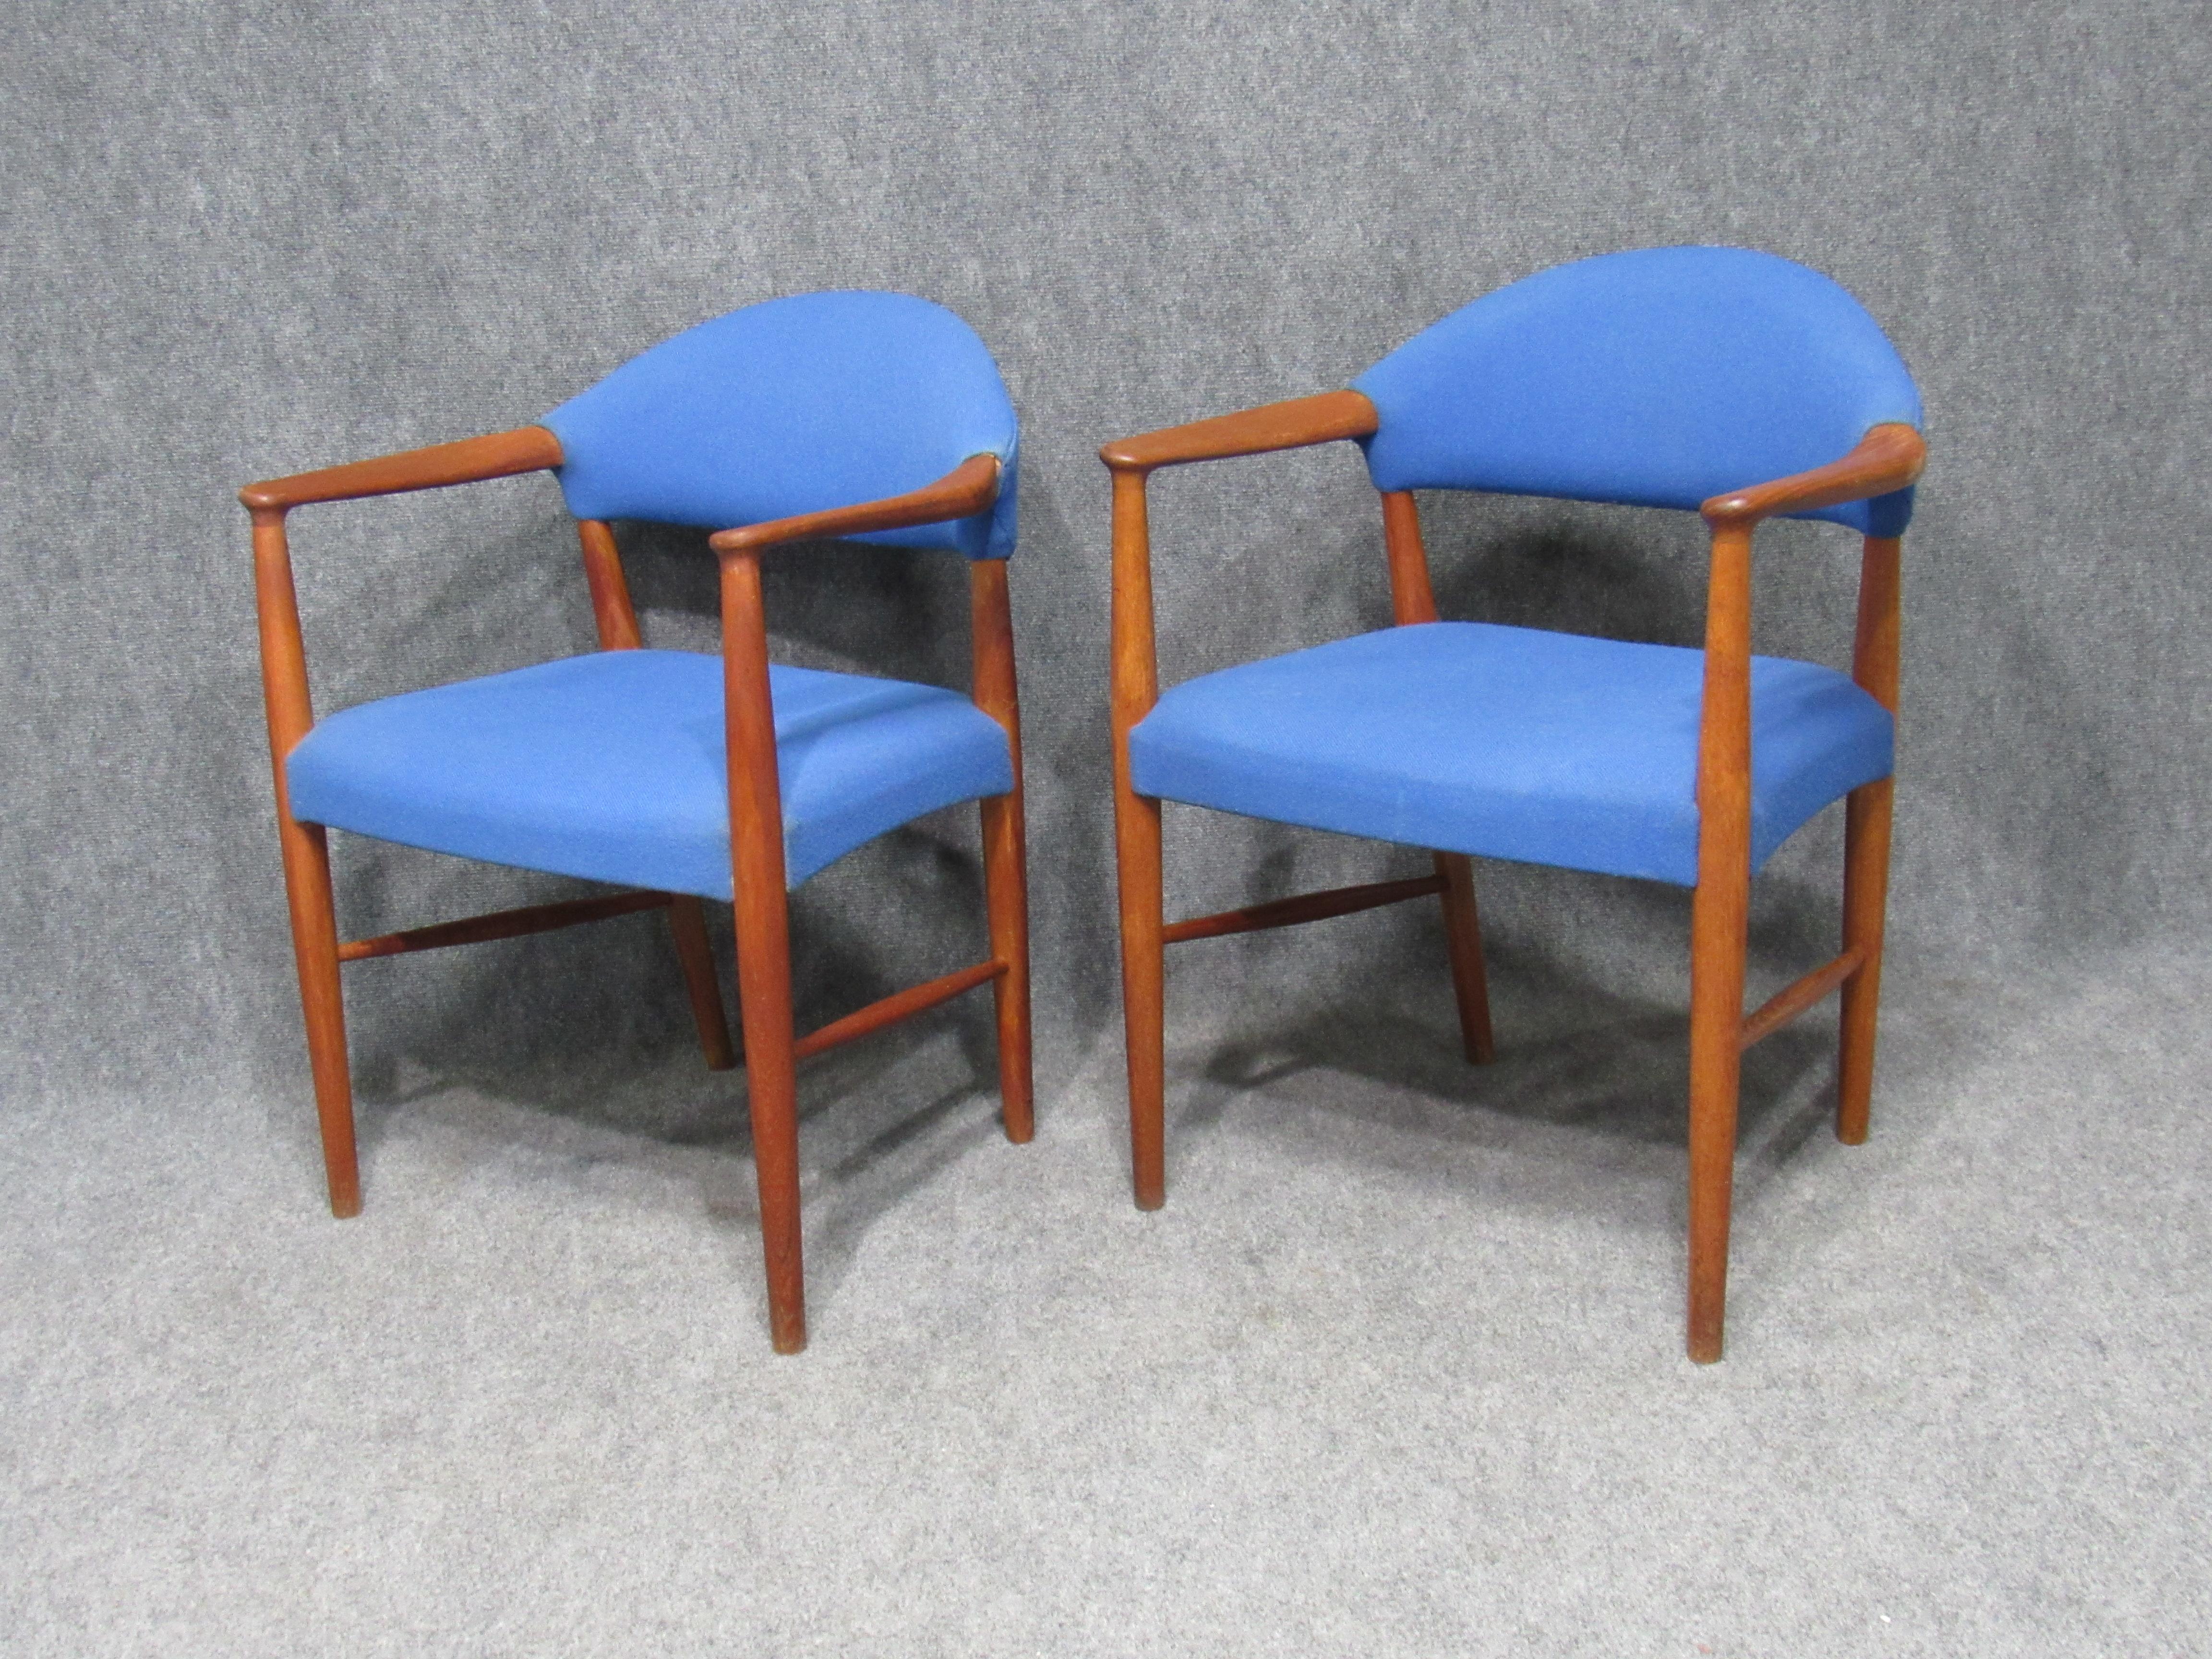 Danish Mid-Century Modern Teak and Blue Wool Armchairs Attributed to Hans Wegner For Sale 5